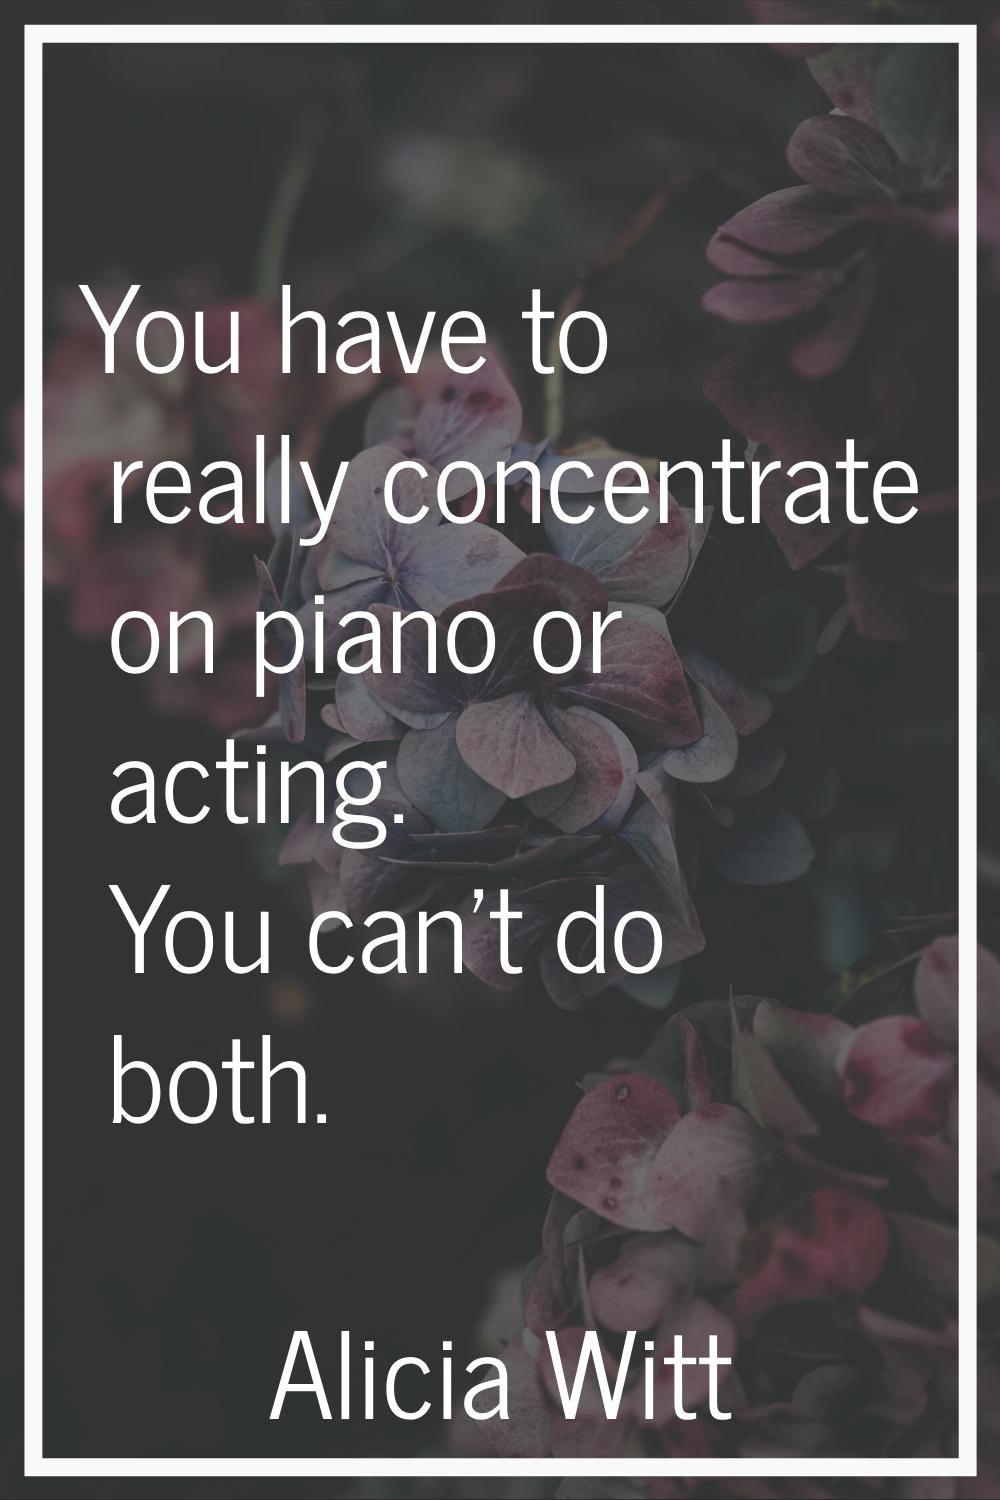 You have to really concentrate on piano or acting. You can't do both.